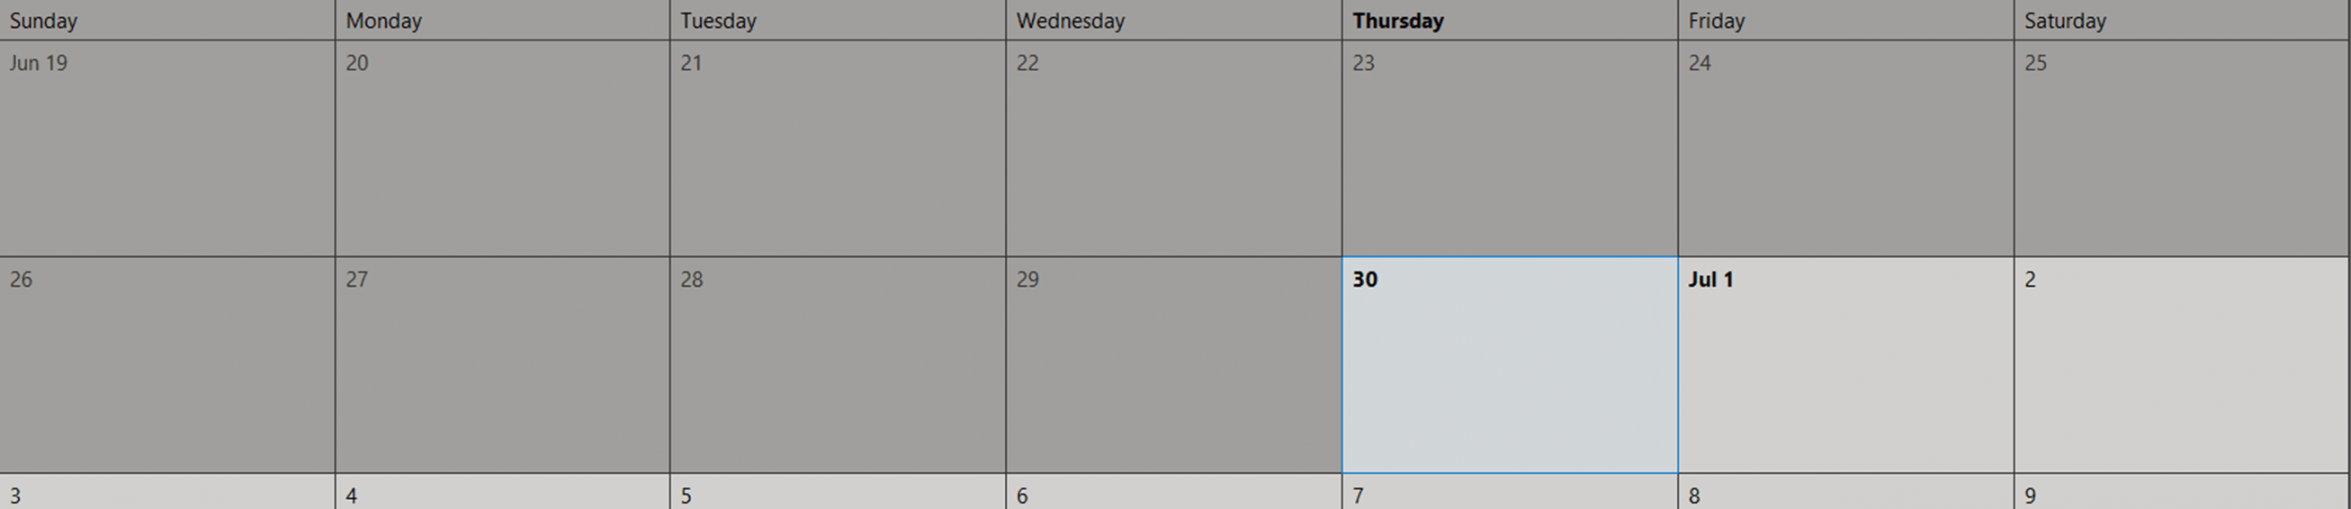 Outlook Calendar - Gray Out Background on Previous Days